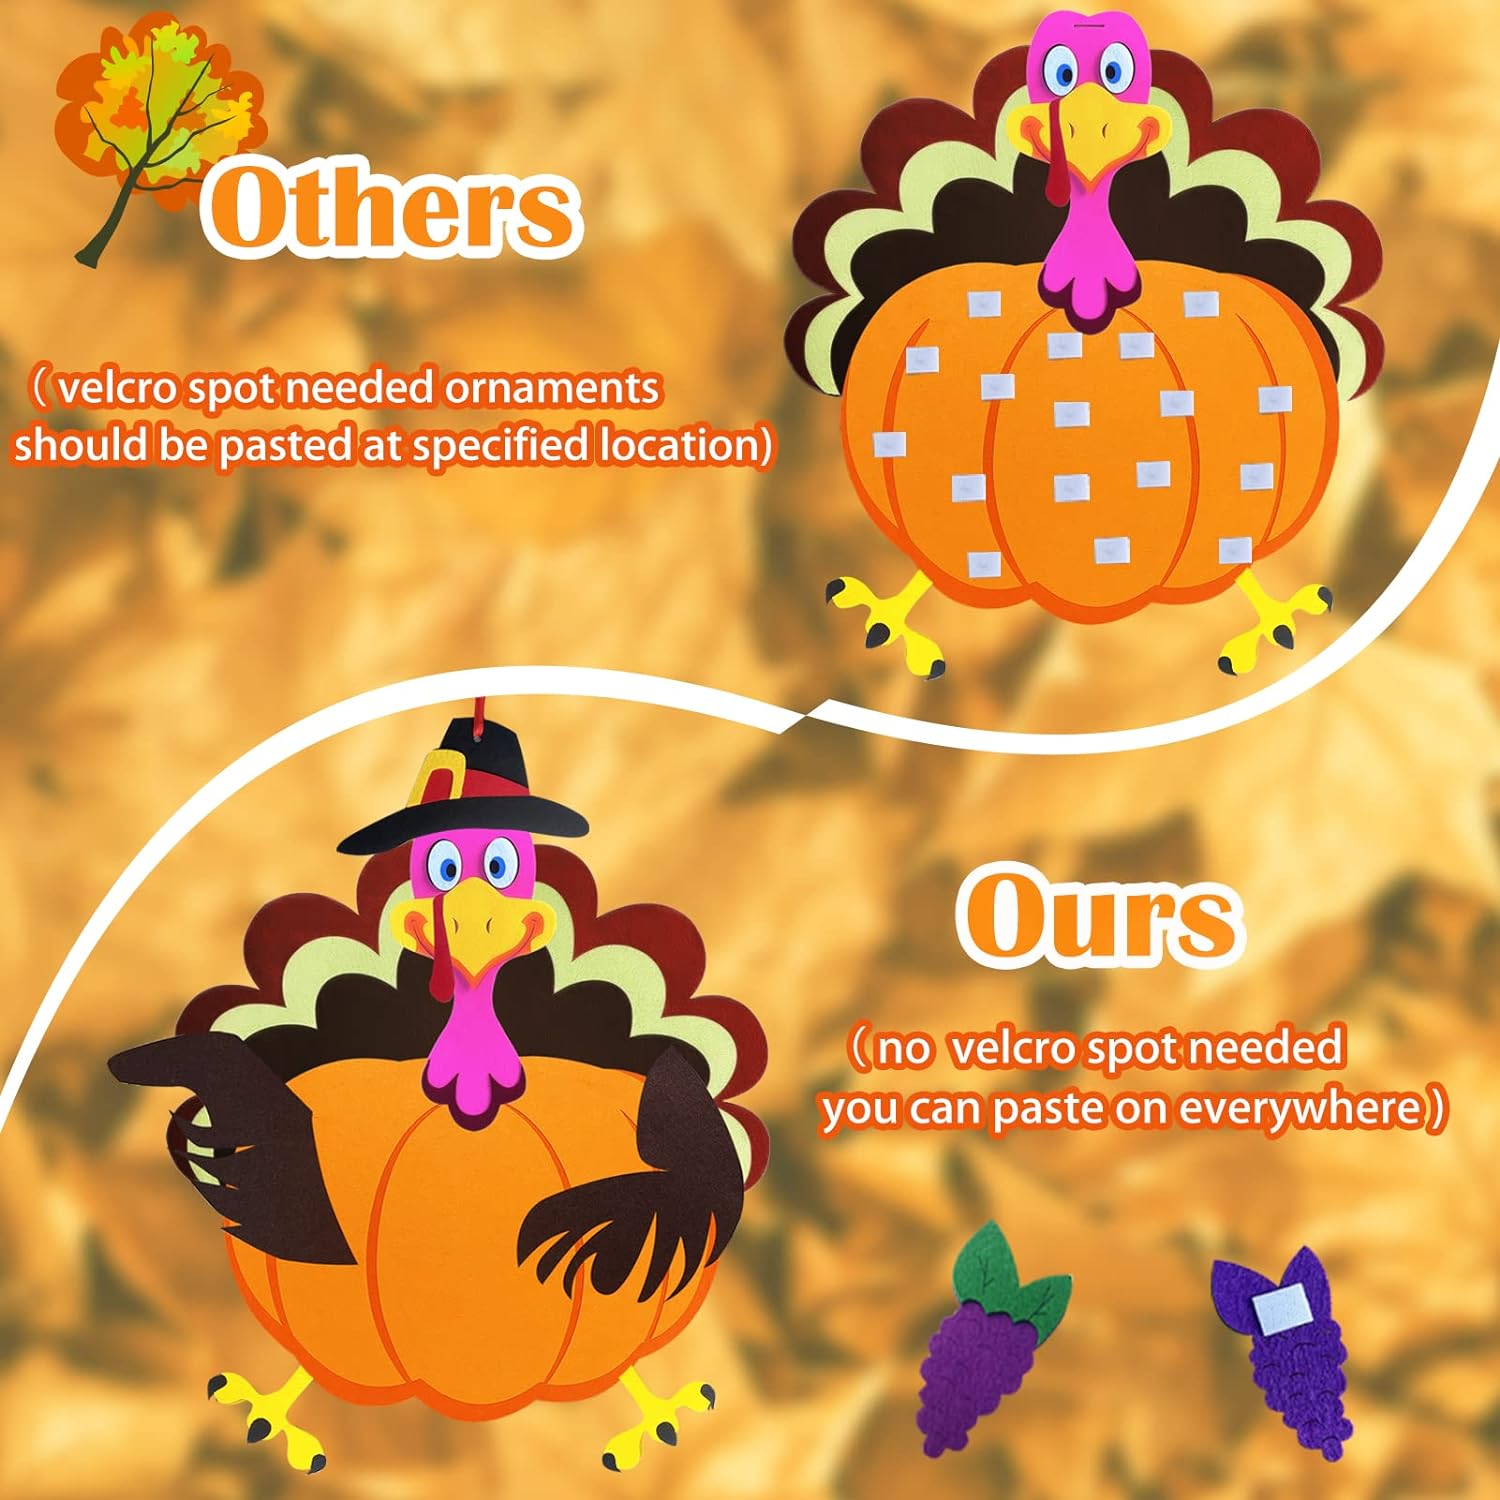 Great Choice Products Diy Fall Thanksgiving Felt Pumpkin Turkey Hanging Decor For Kids Felt Crafts And Kits Adhesive Ornaments Thanksgiving Part